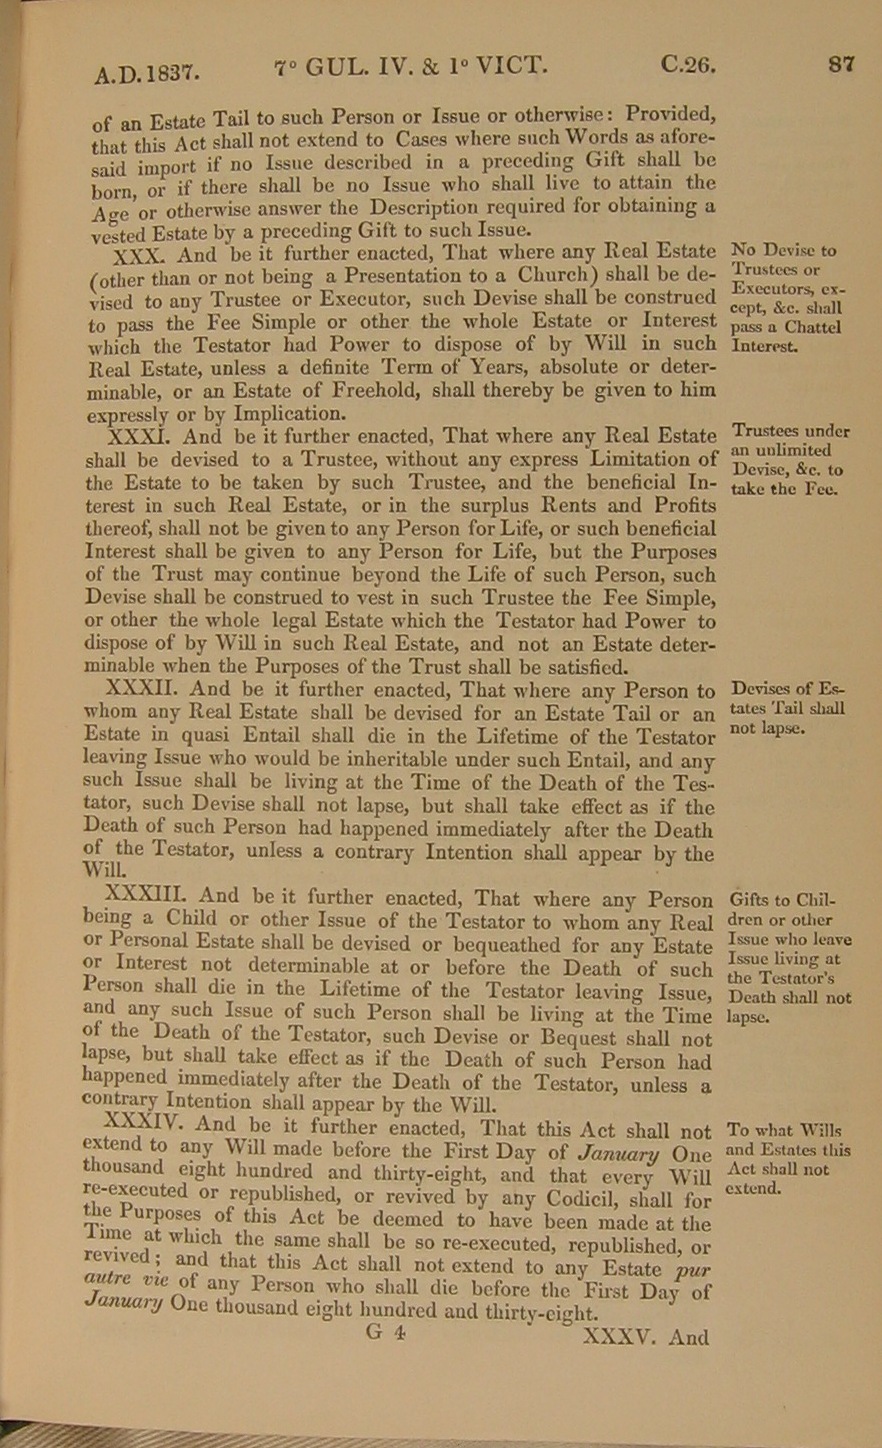 Image of 7 William IV and 1 Victoria I, c. 26 (page 8 of 9). Click for larger image.